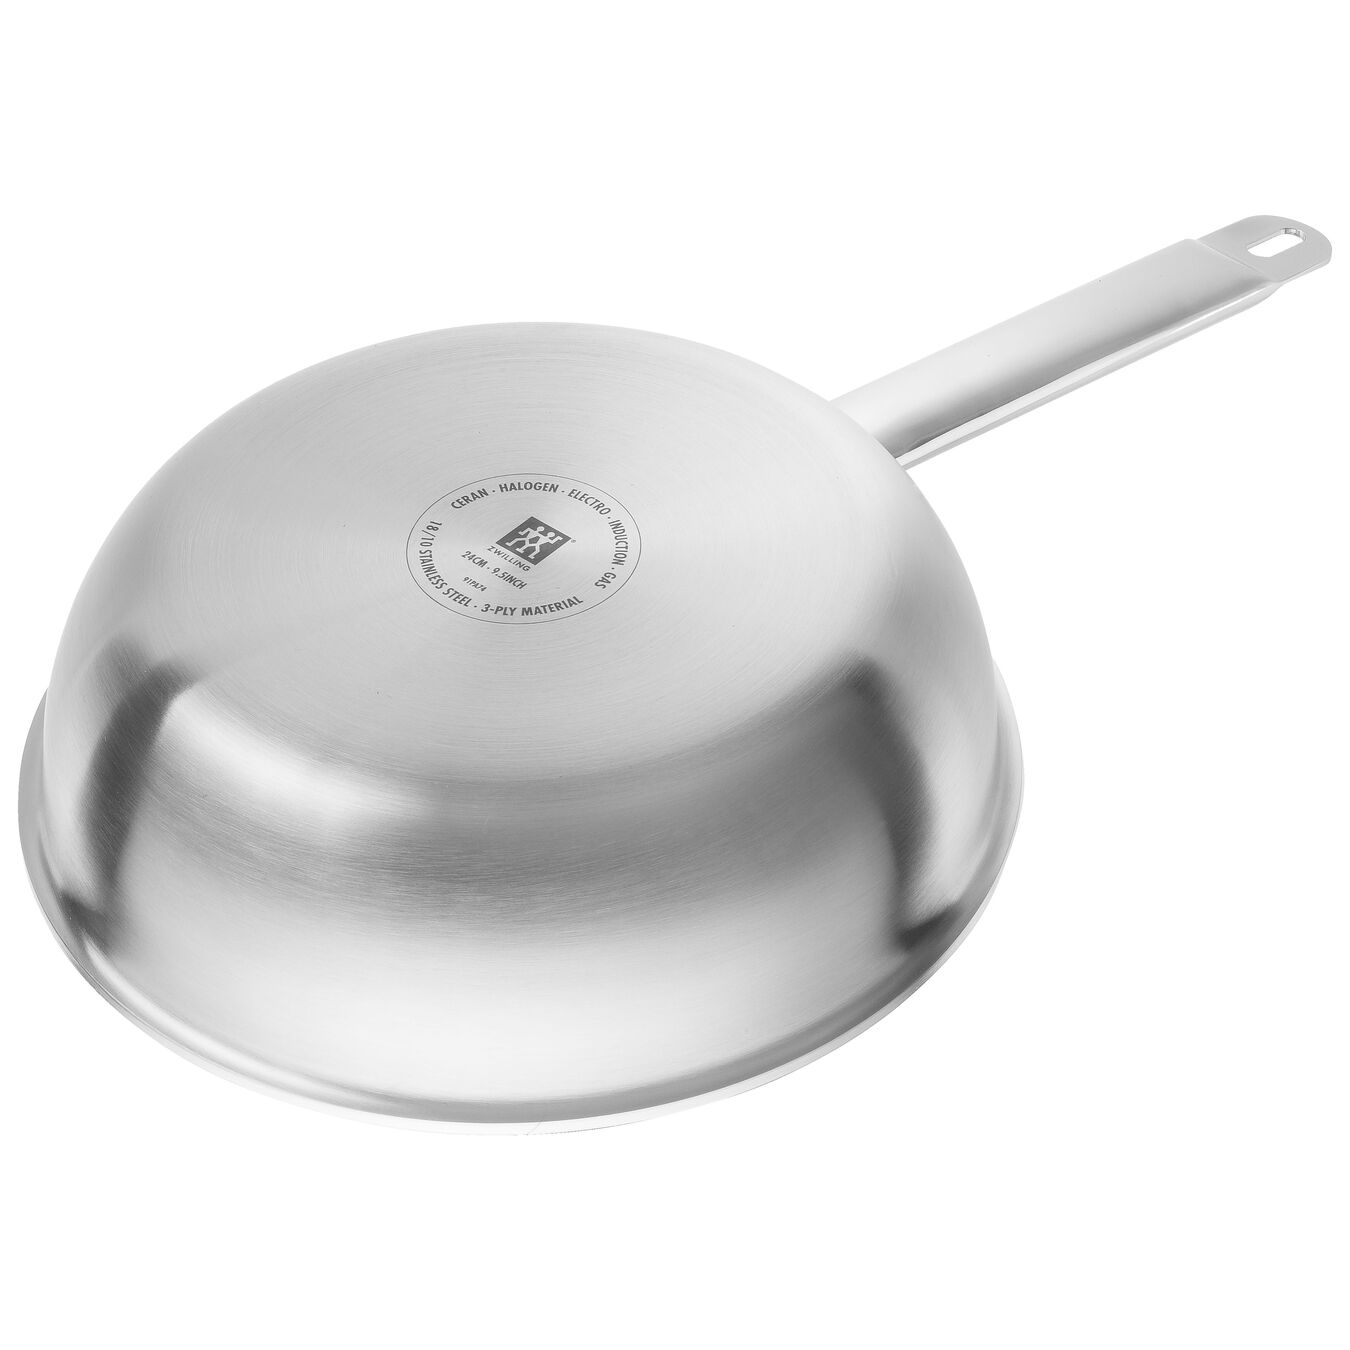 24 cm 18/10 Stainless Steel Frying pan,,large 3